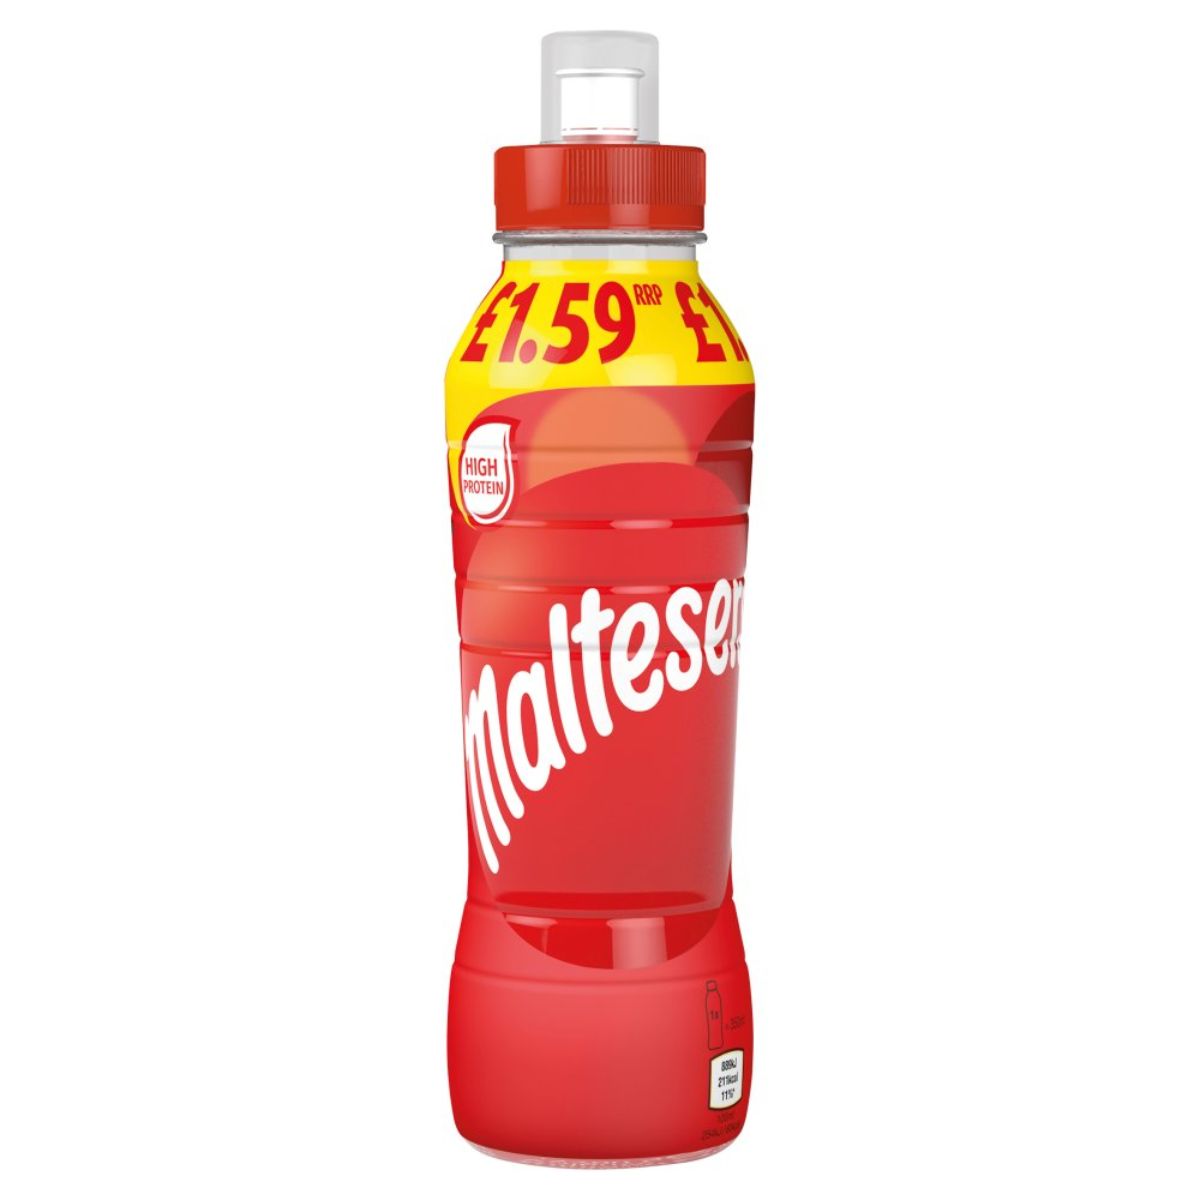 A bottle of Maltesers - Chocolate Milk Shake Drink - 350ml on a white background.